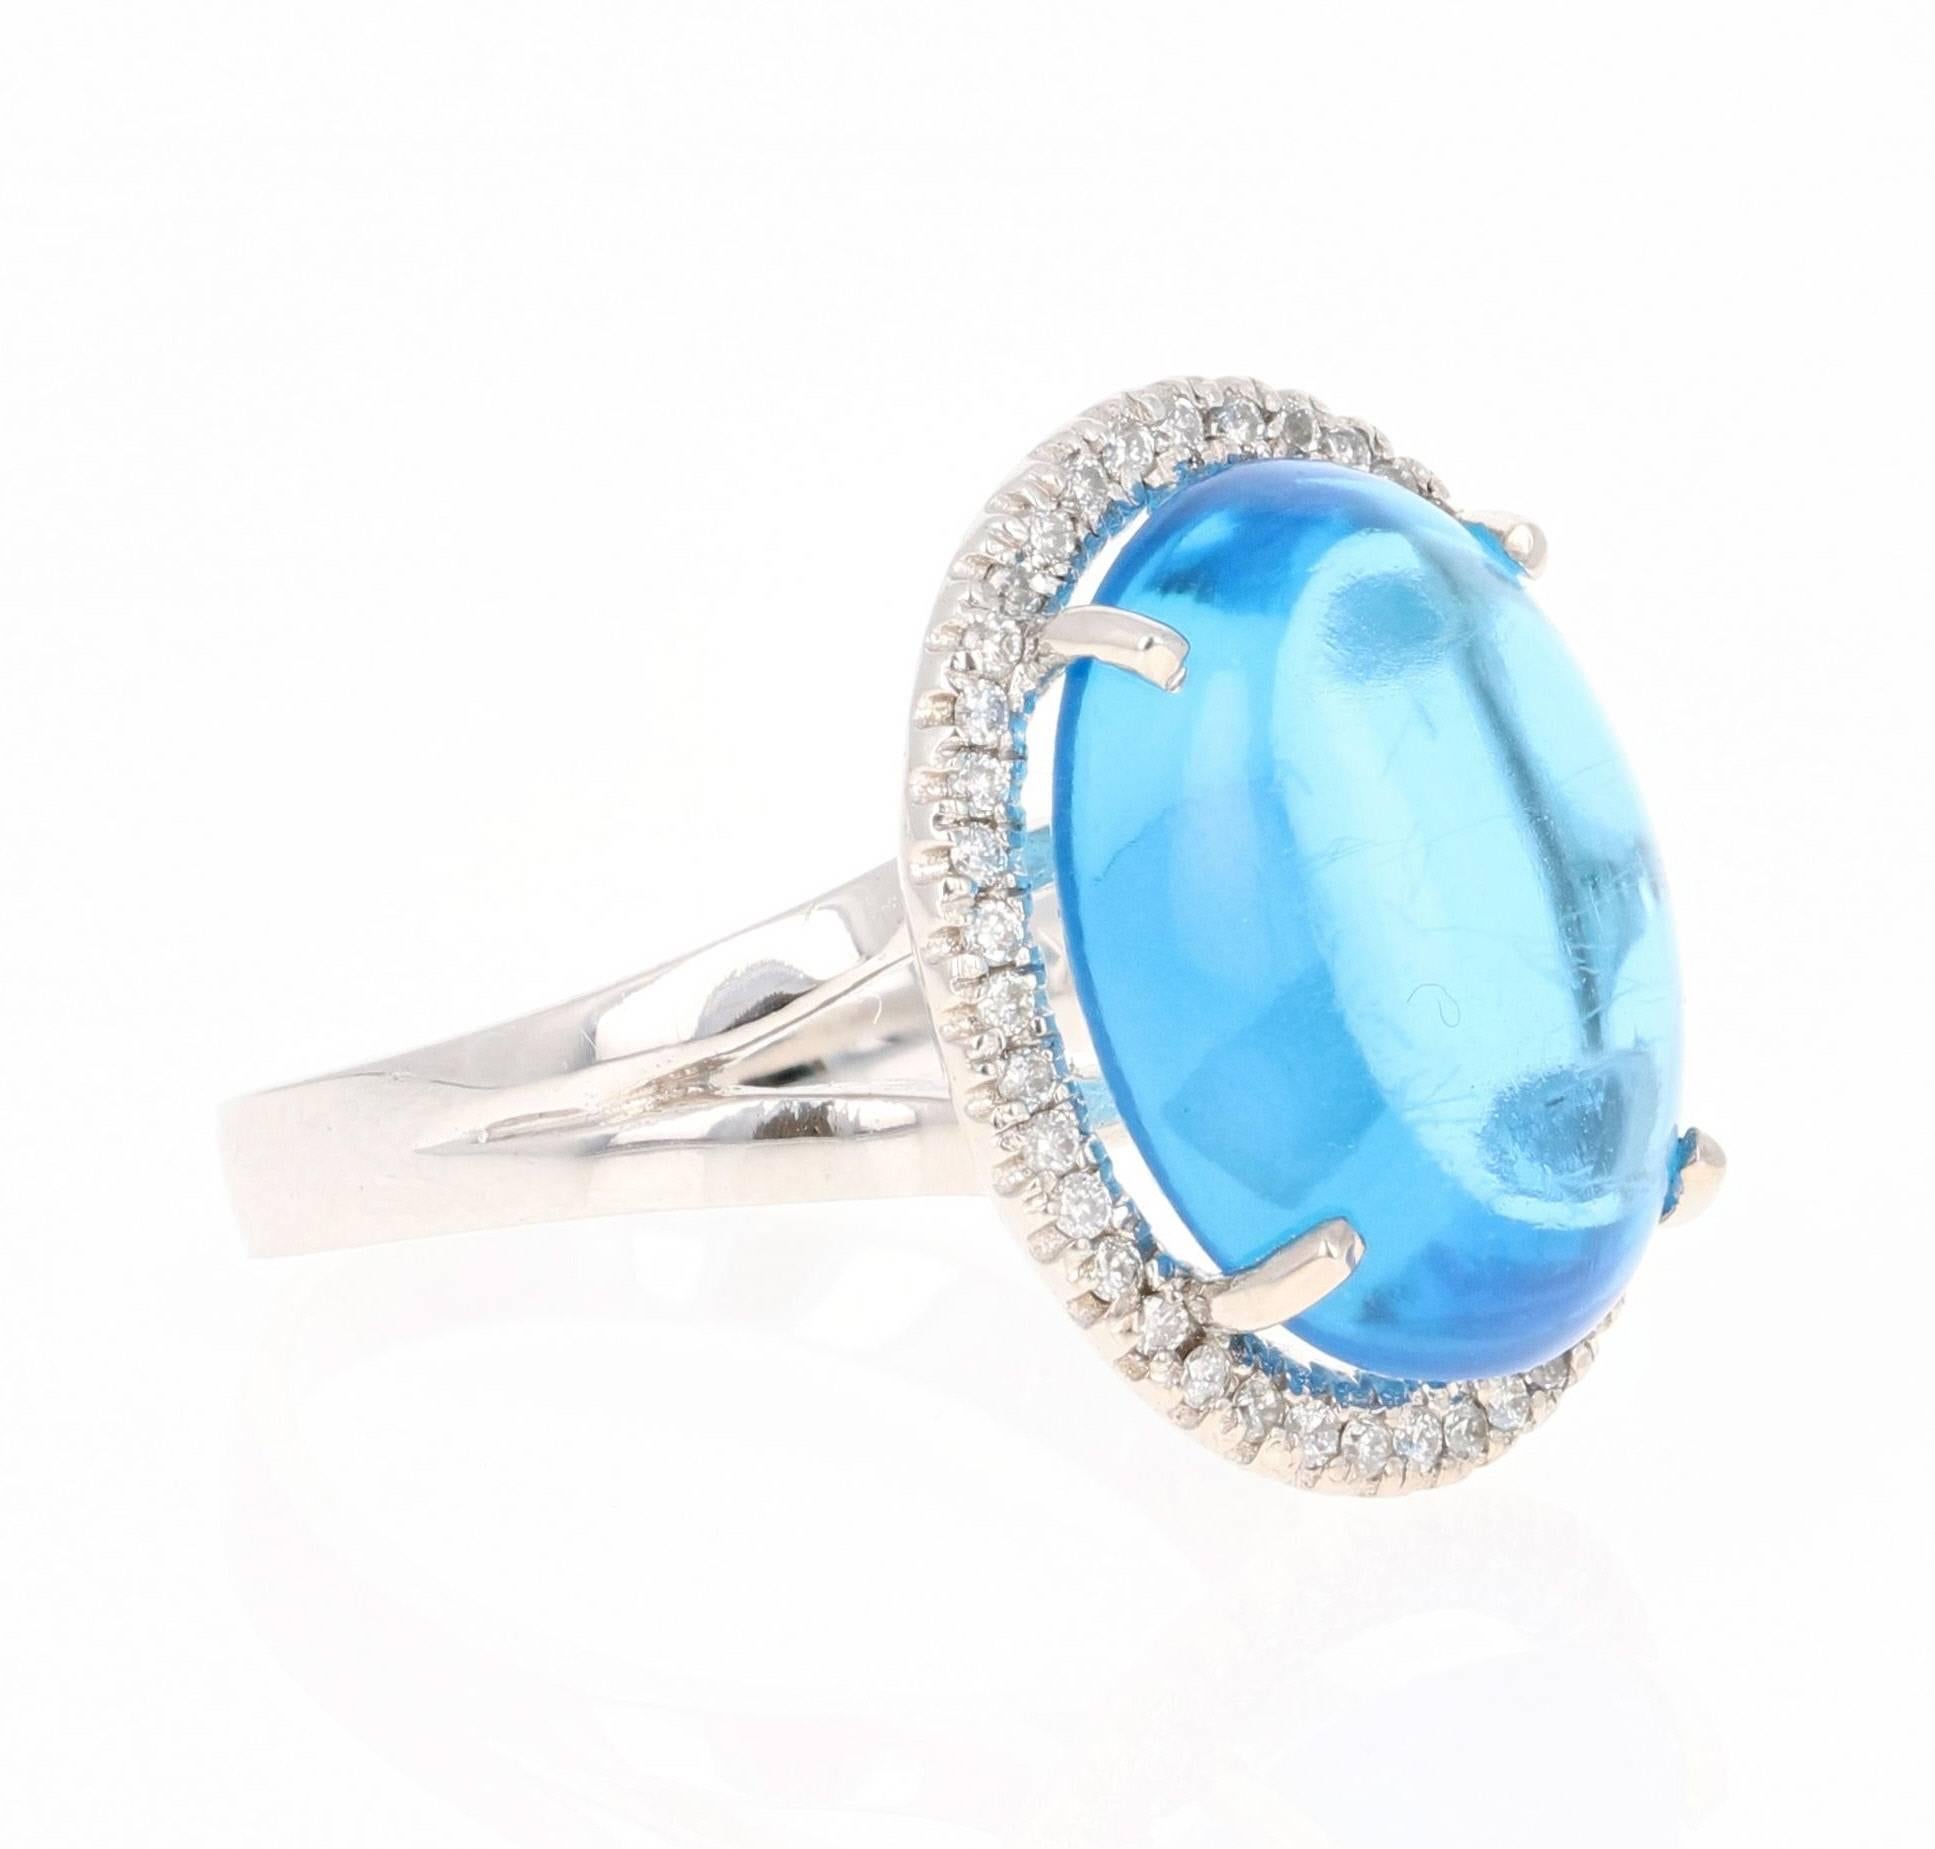 This beautiful cabochon cut Blue Topaz and Diamond ring has a gorgeous 12.73 Carat Blue Topaz and its surrounded by 42 Round Cut Diamonds that weigh 0.29 Carats. The total carat weight of the ring is 13.02 Carats. 

The Oval Cut Cabochons